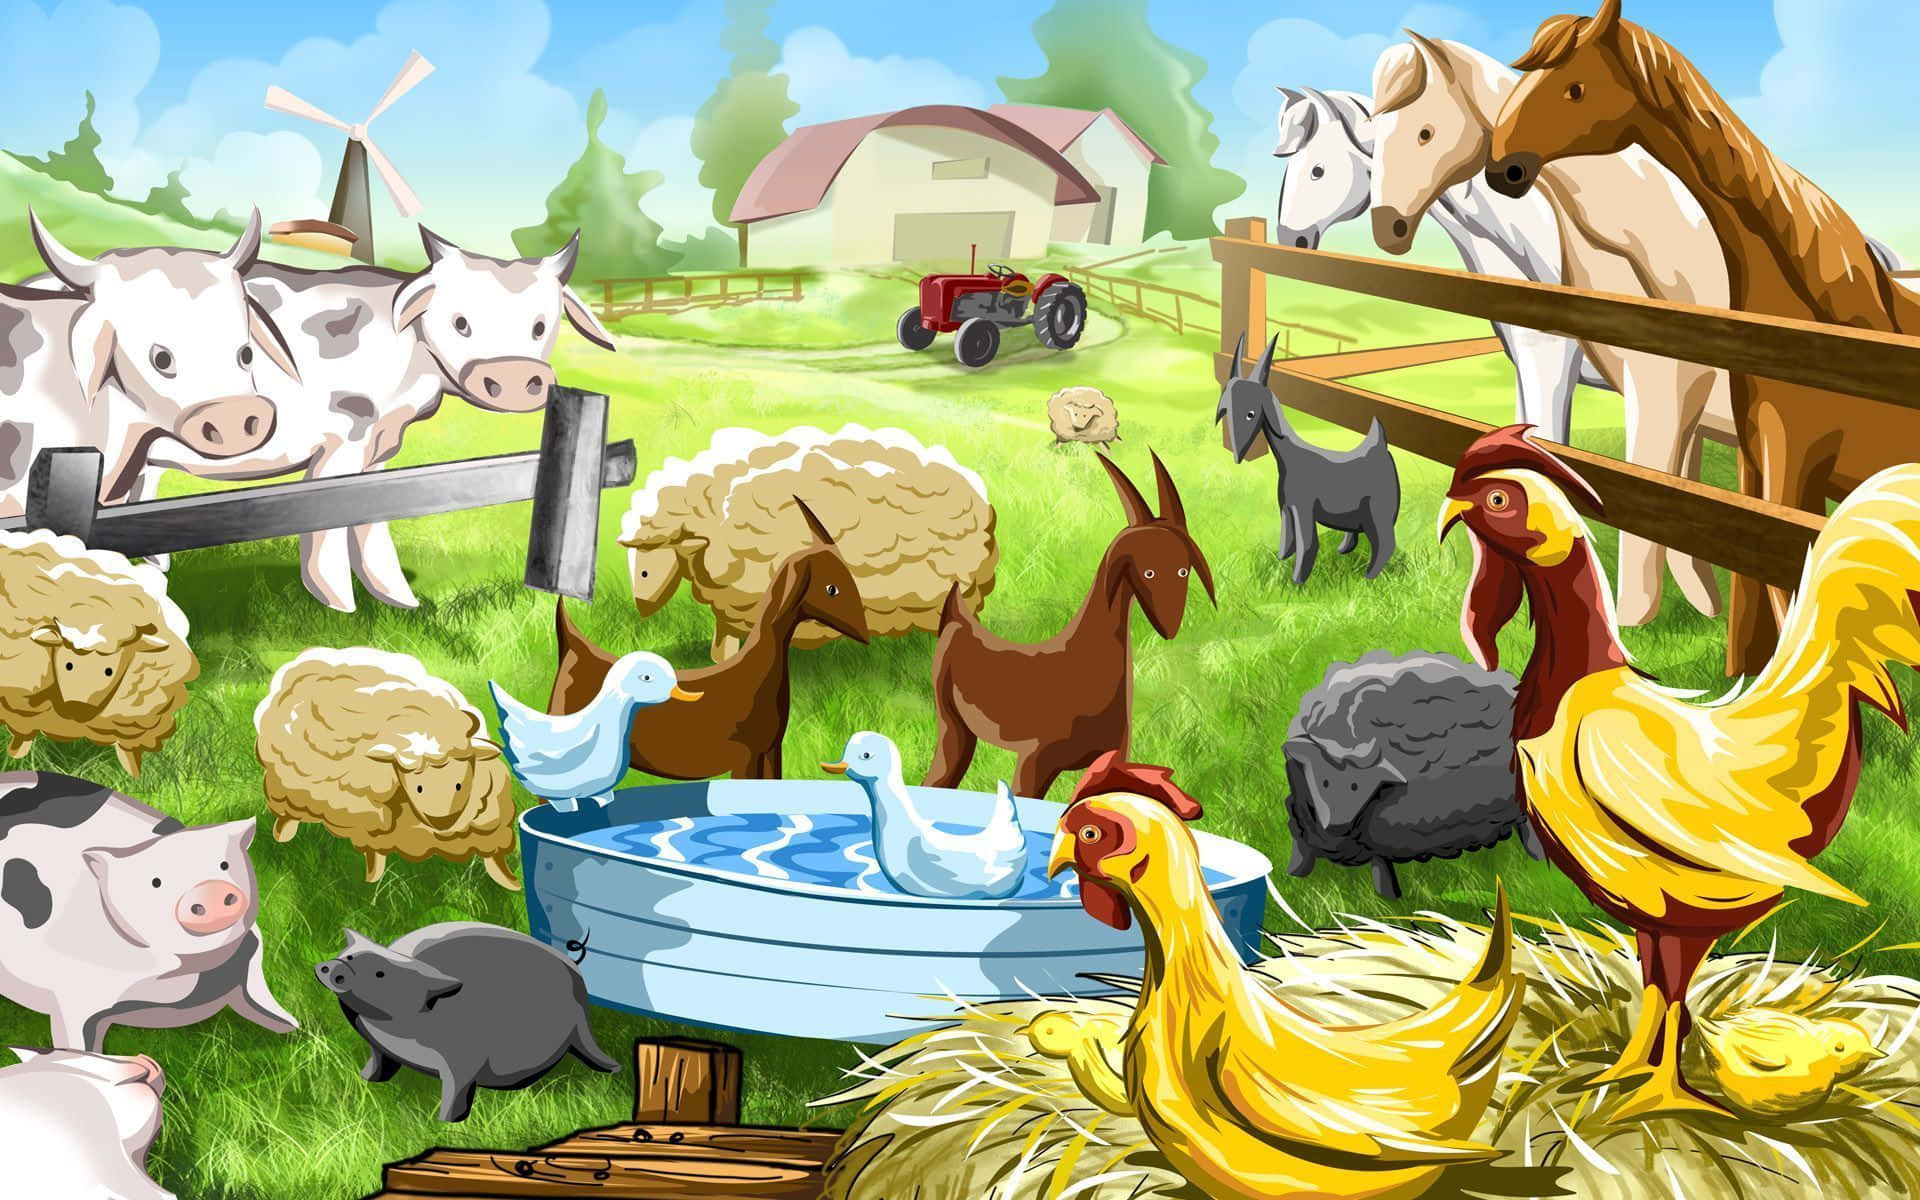 A Group of Farm Animals Enjoying the Sunny Day in the Pasture